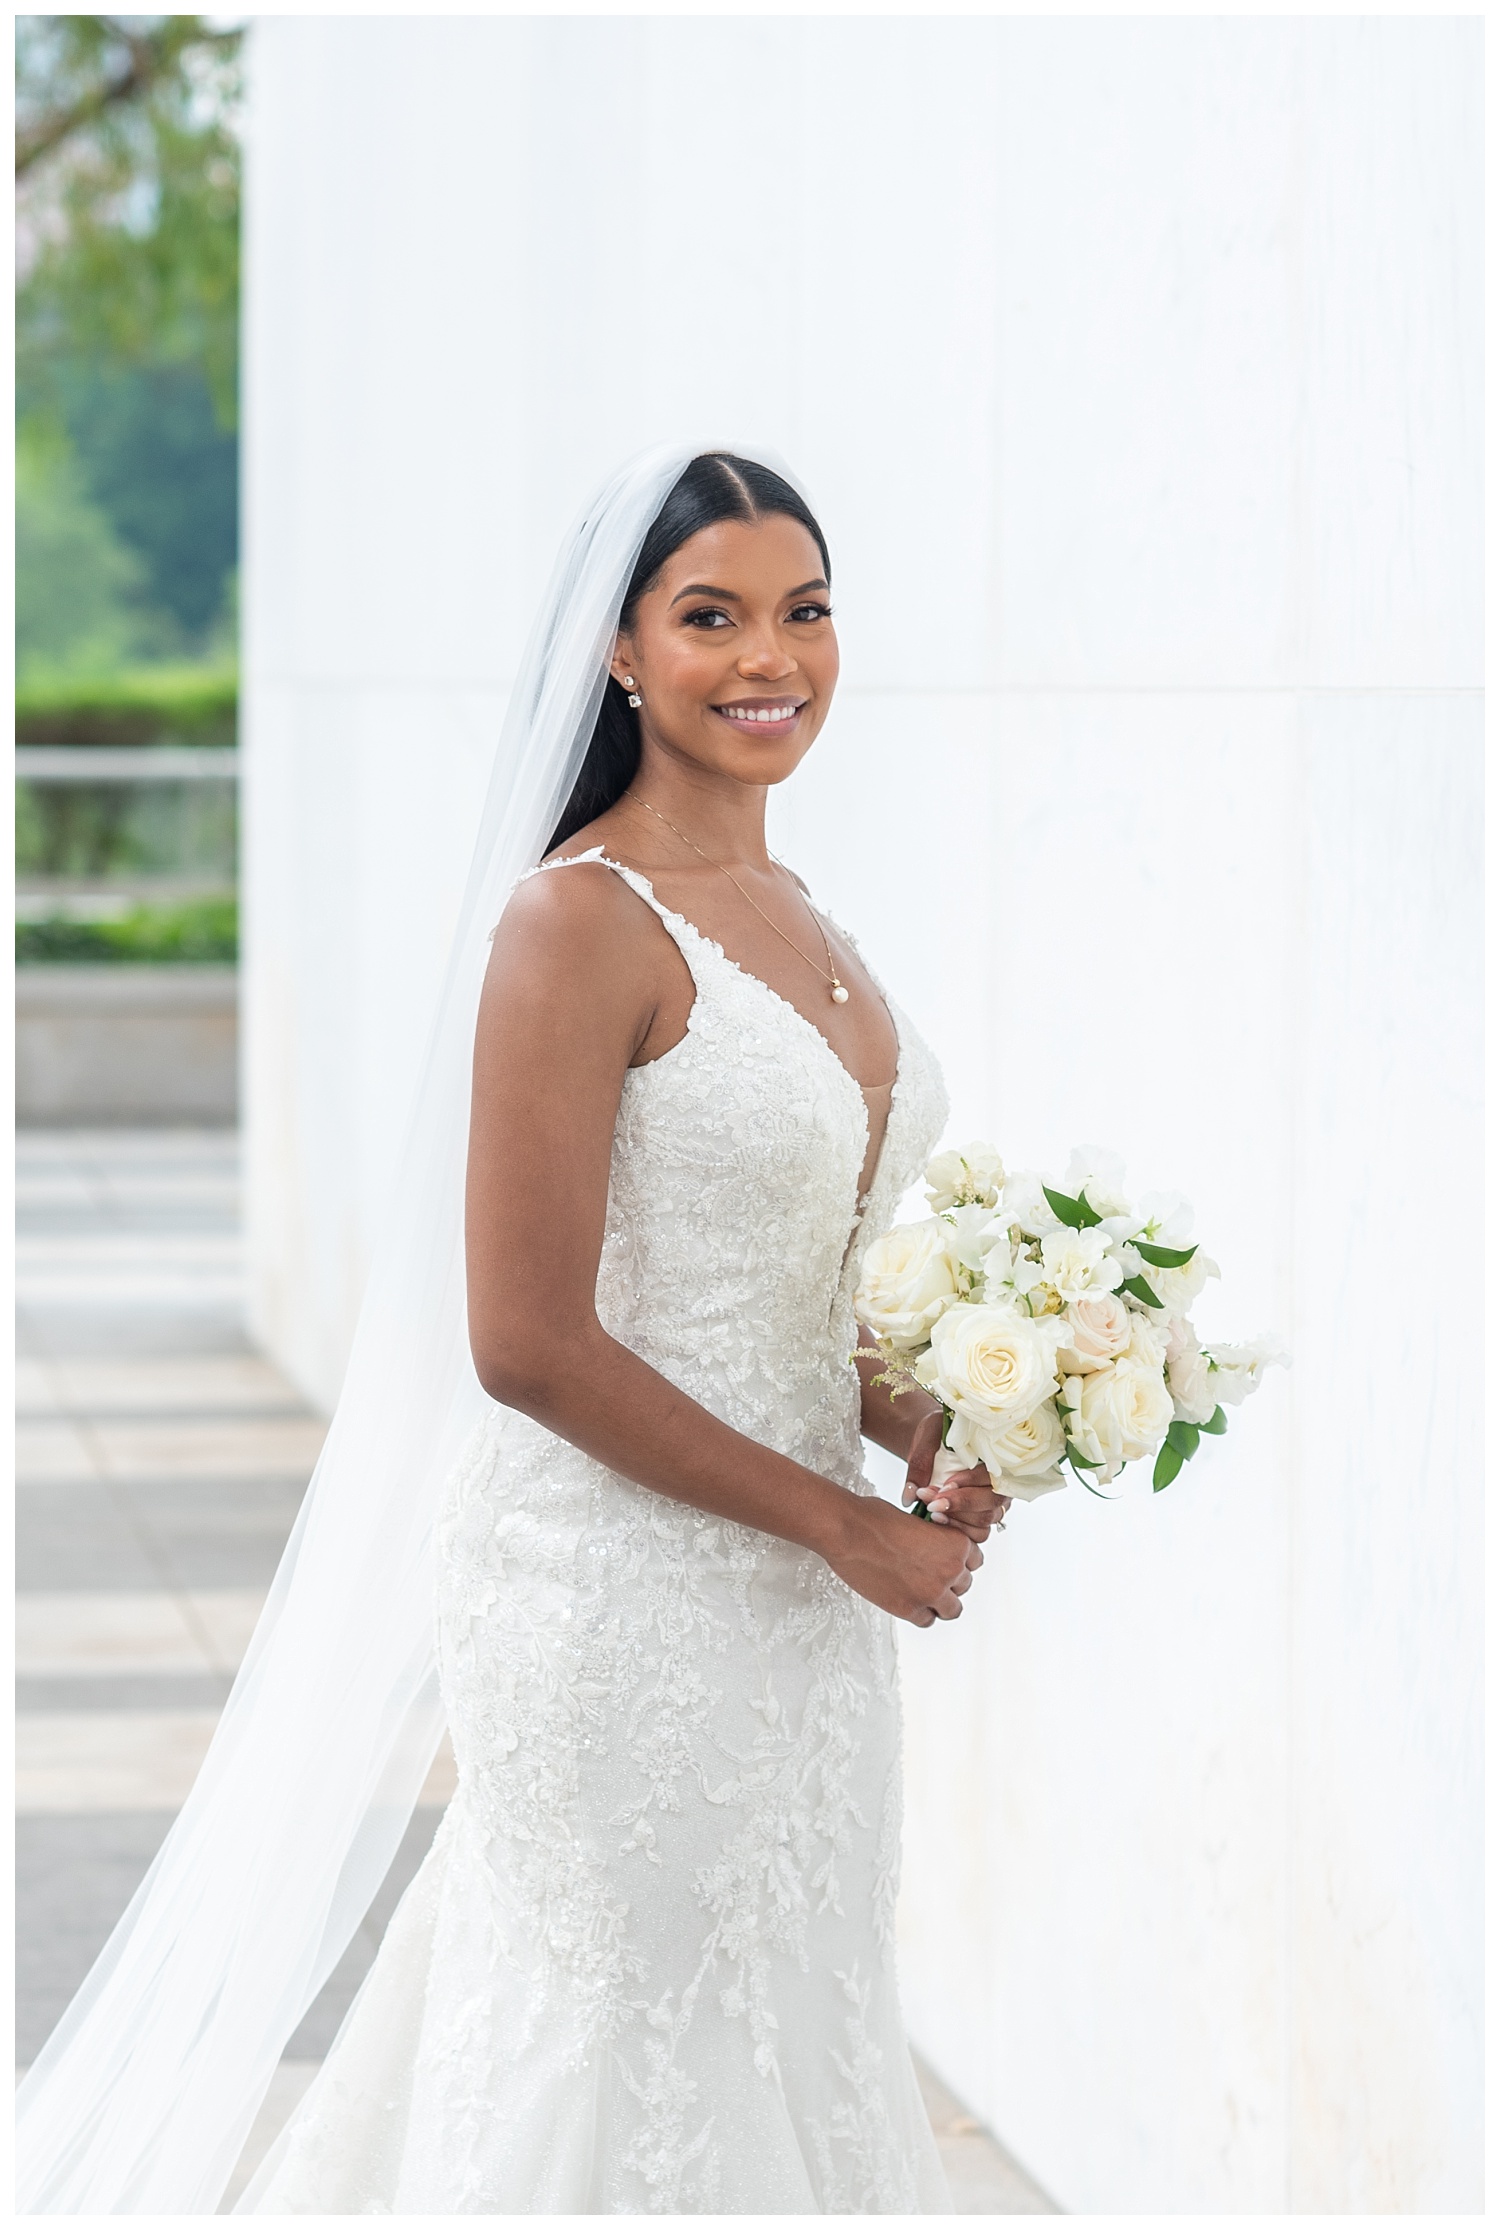 bride posing with her flowers at a summer wedding in Washington, D.C.